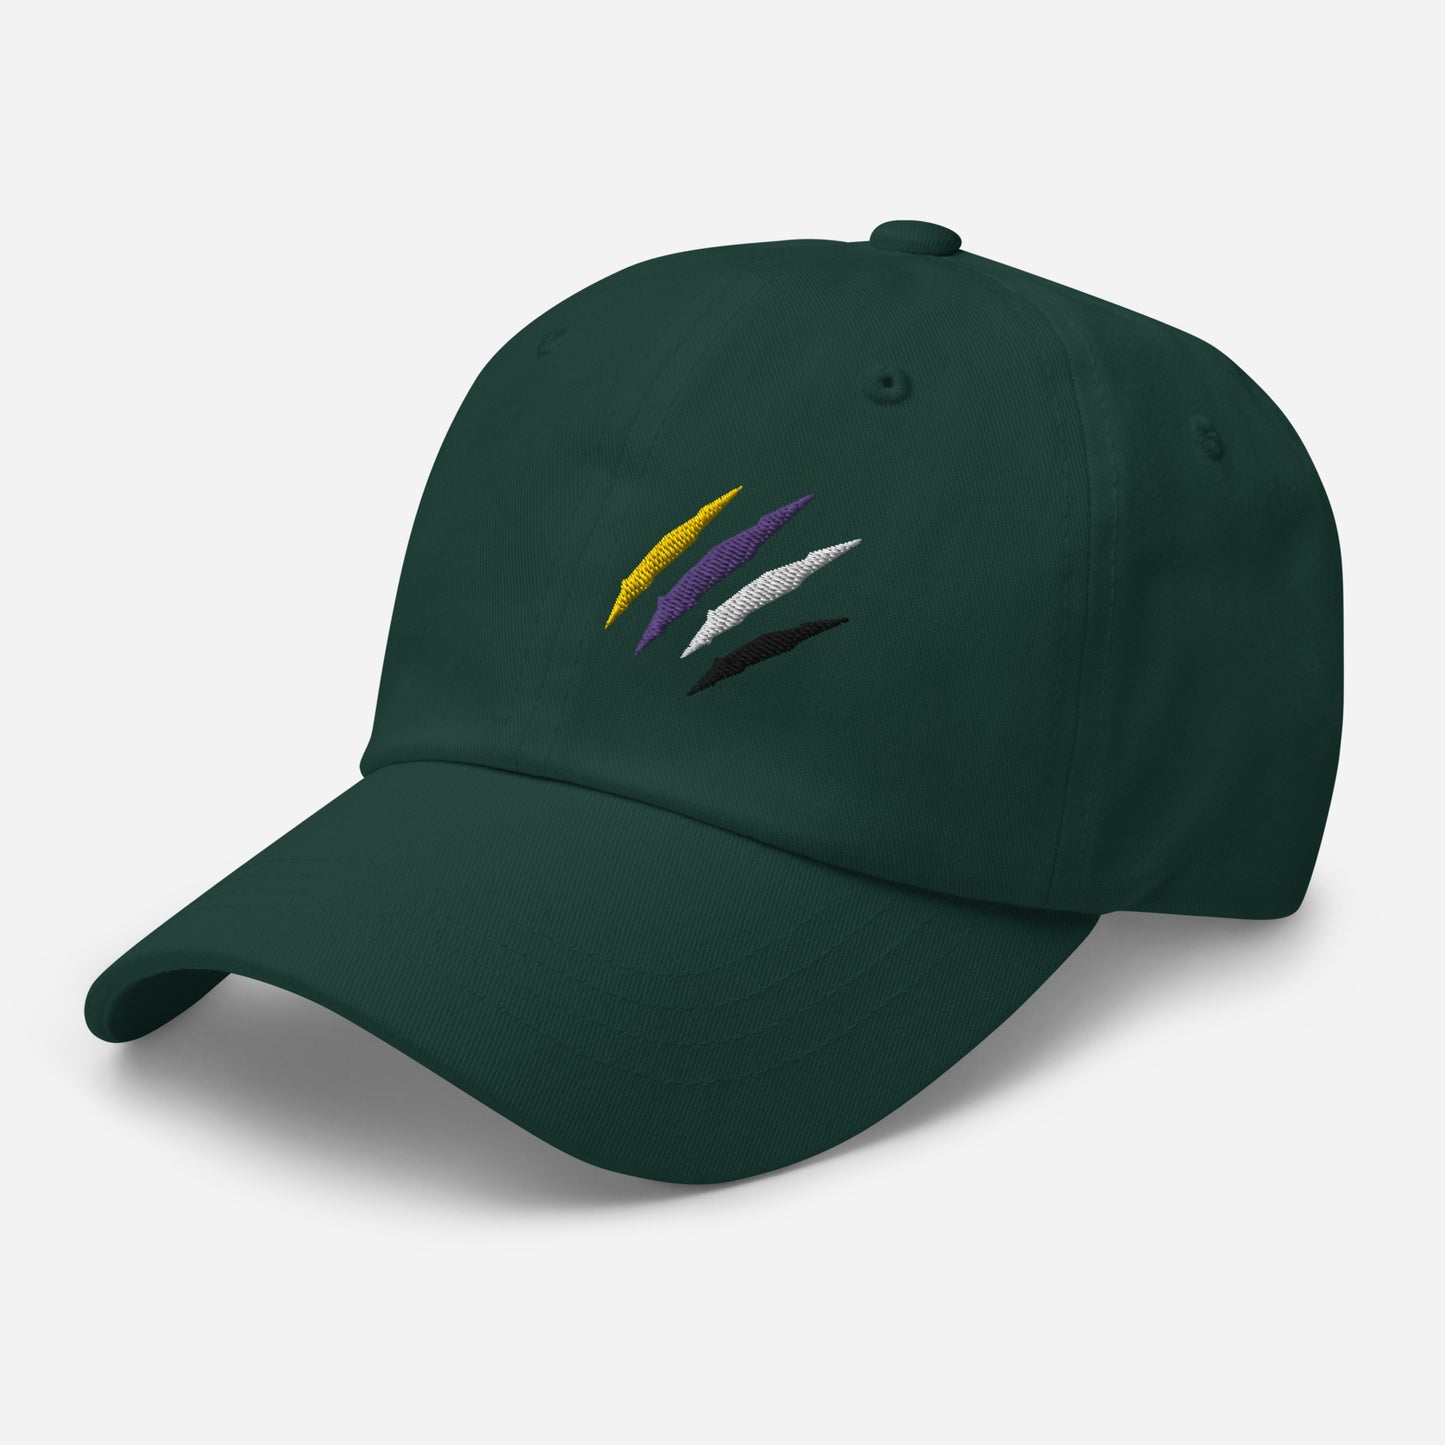 Spruce baseball hat featuring non-binary pride scratch mark embroidery with a low profile, adjustable strap.